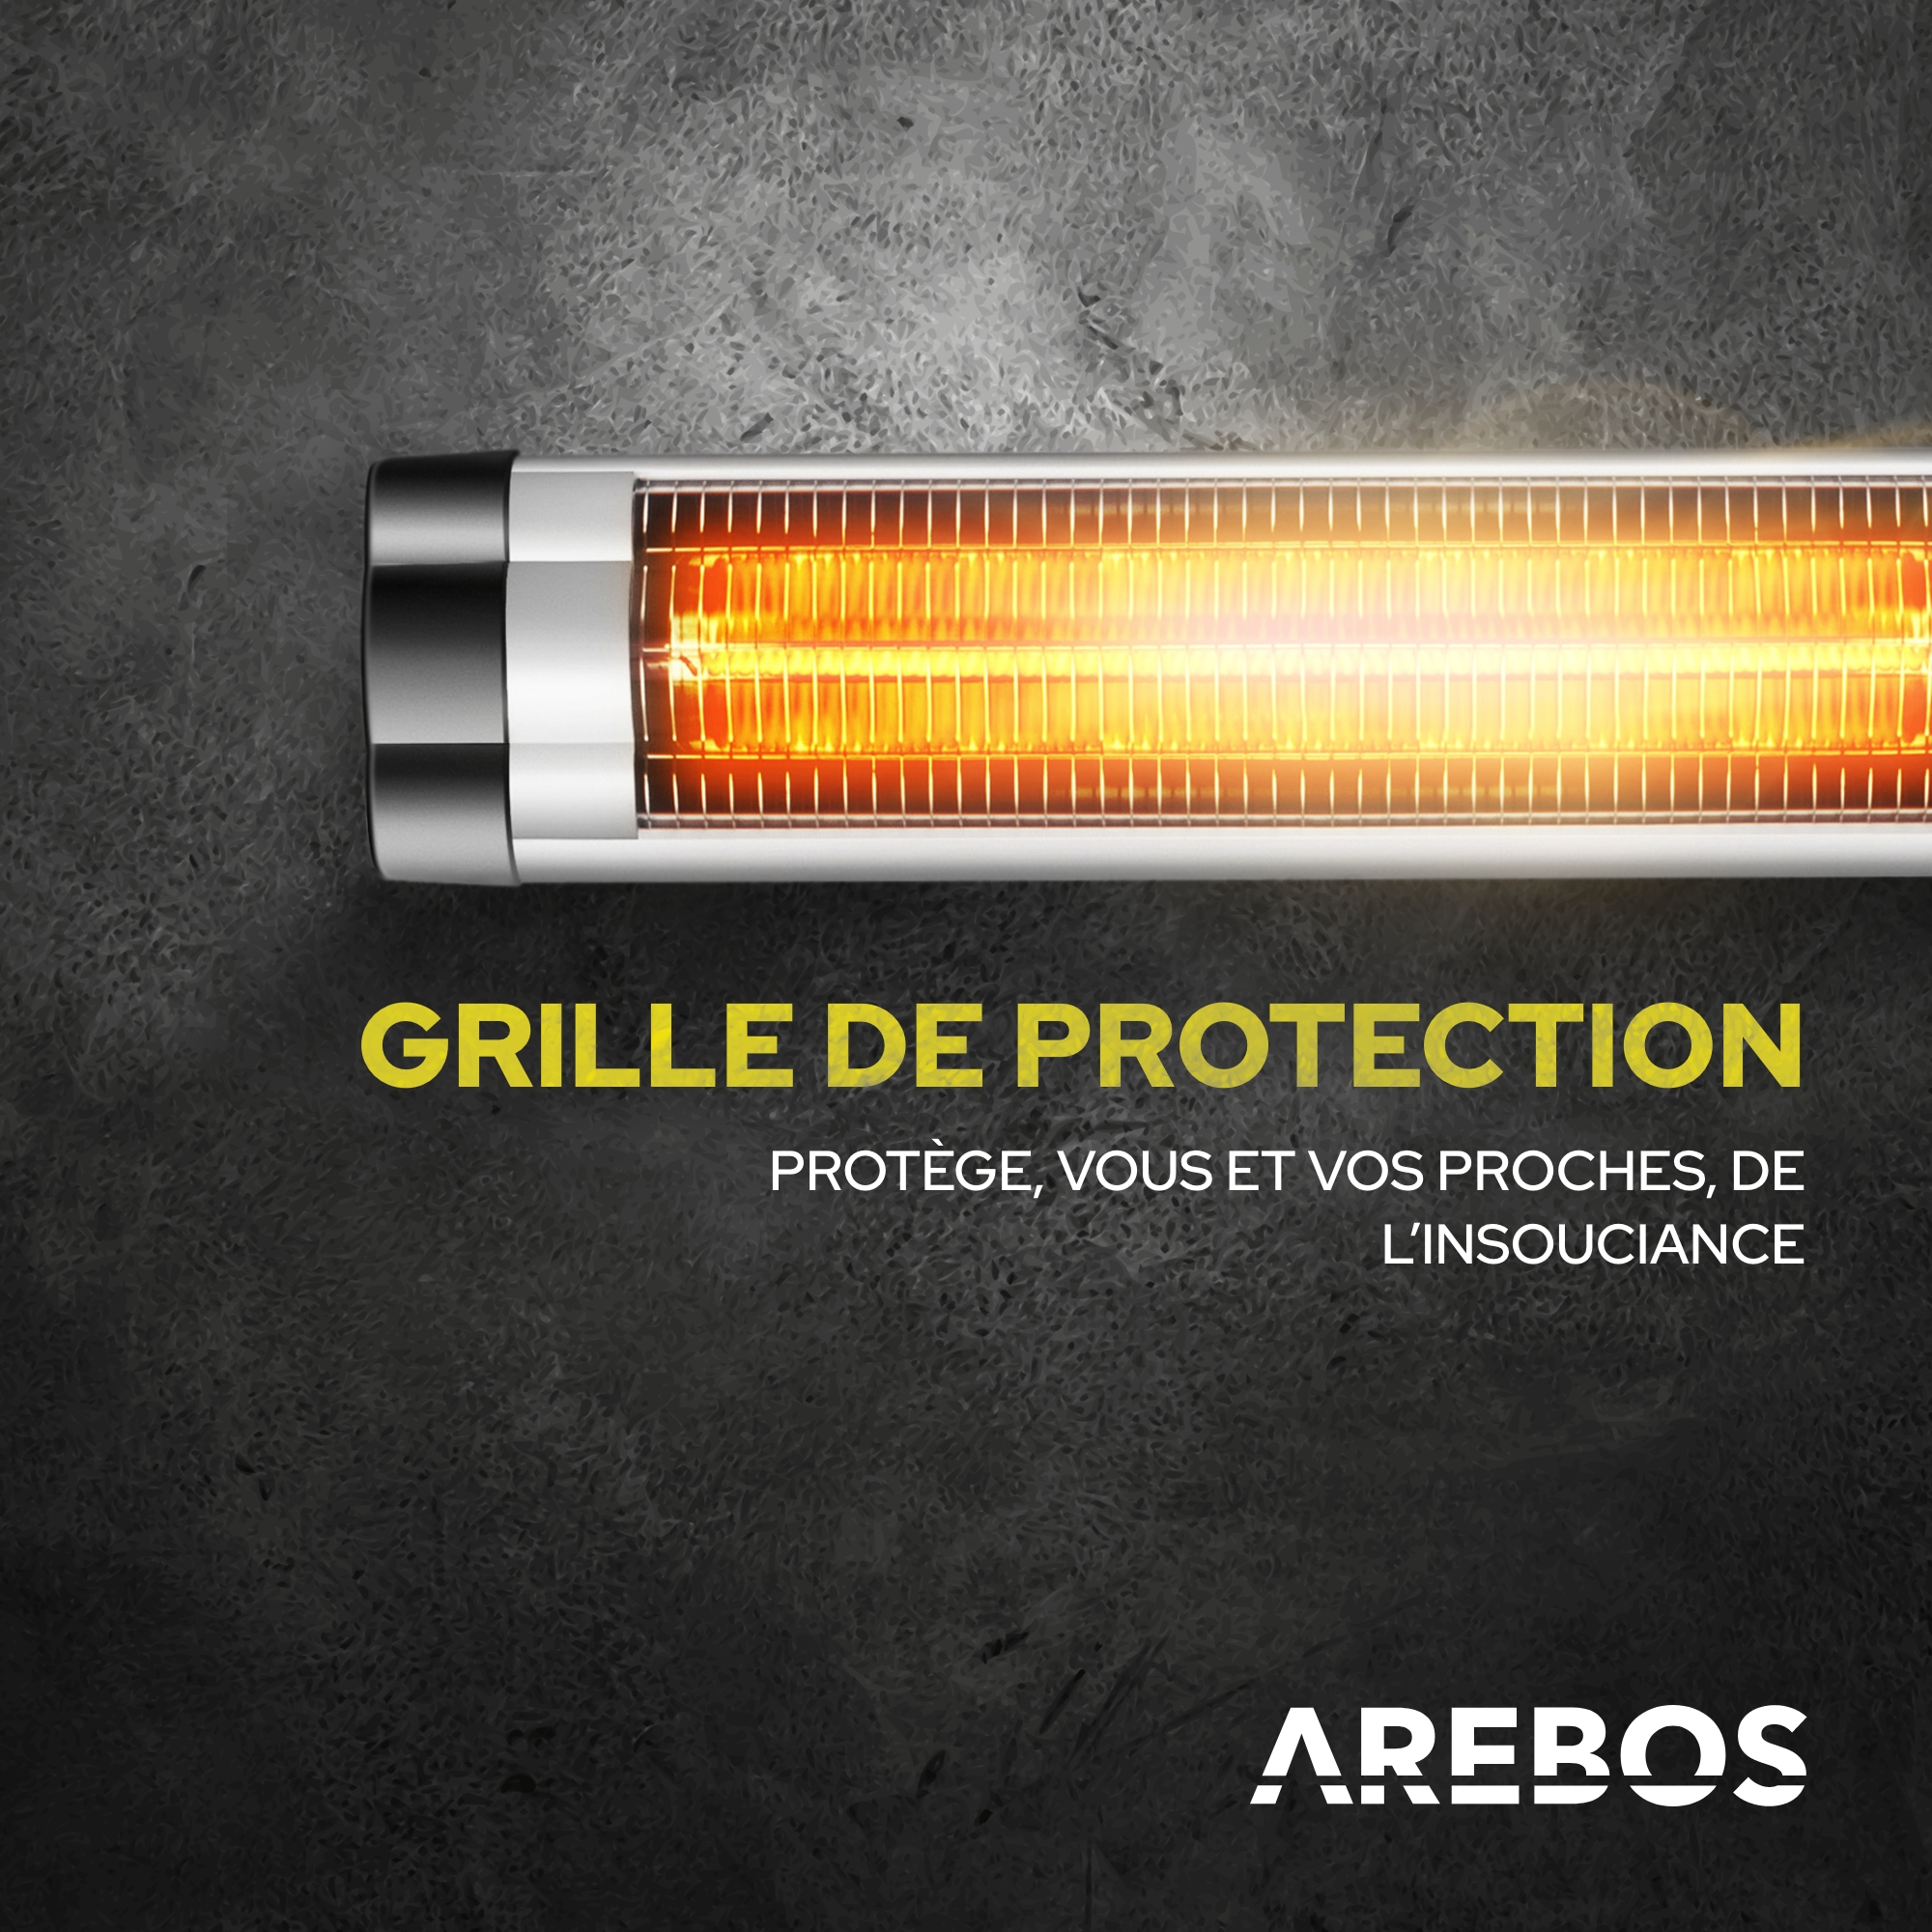 AREBOS Chauffage radiant infrarouge 2500W avec support Radiateur